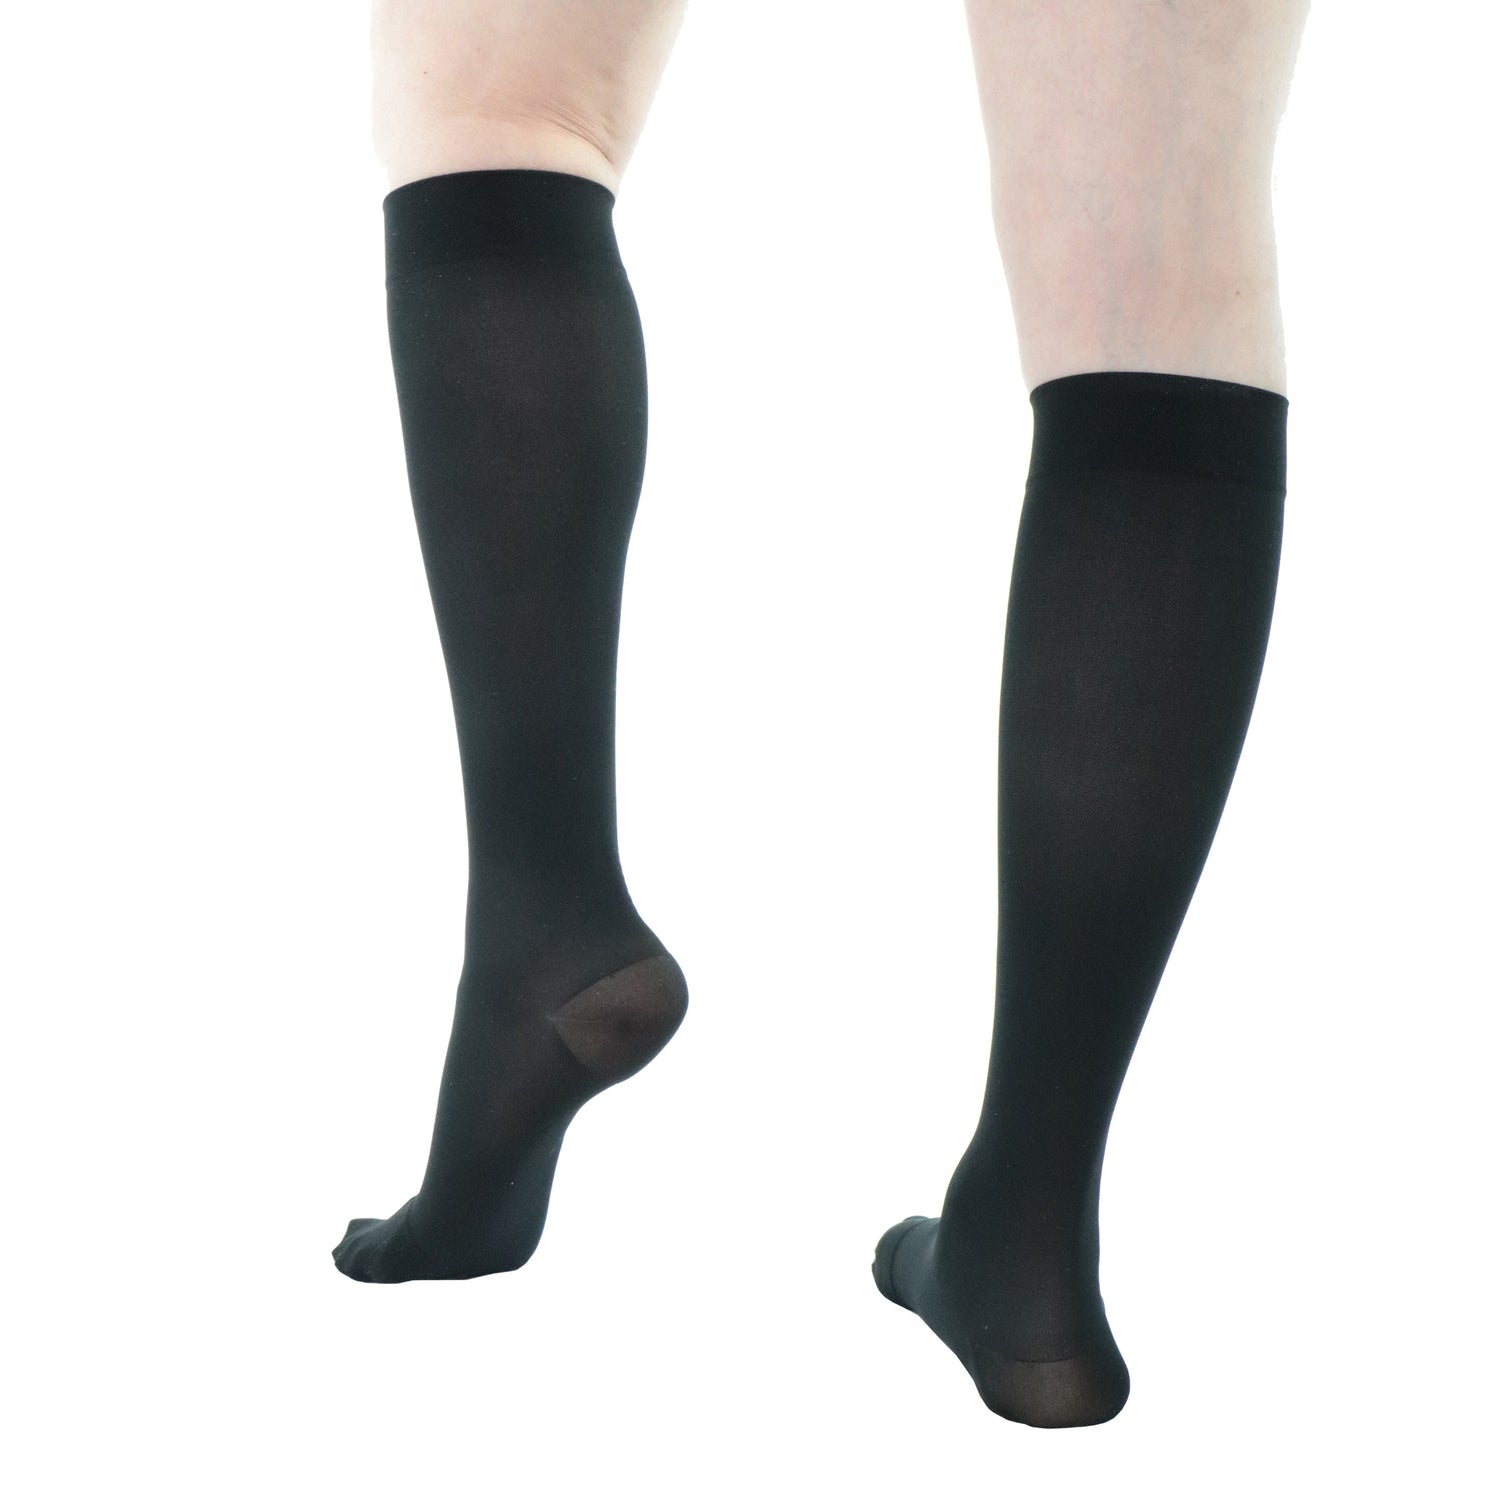 Doctor Brace Circutrend 30-40 mmhg calf compression stockings for women closed toe black left view